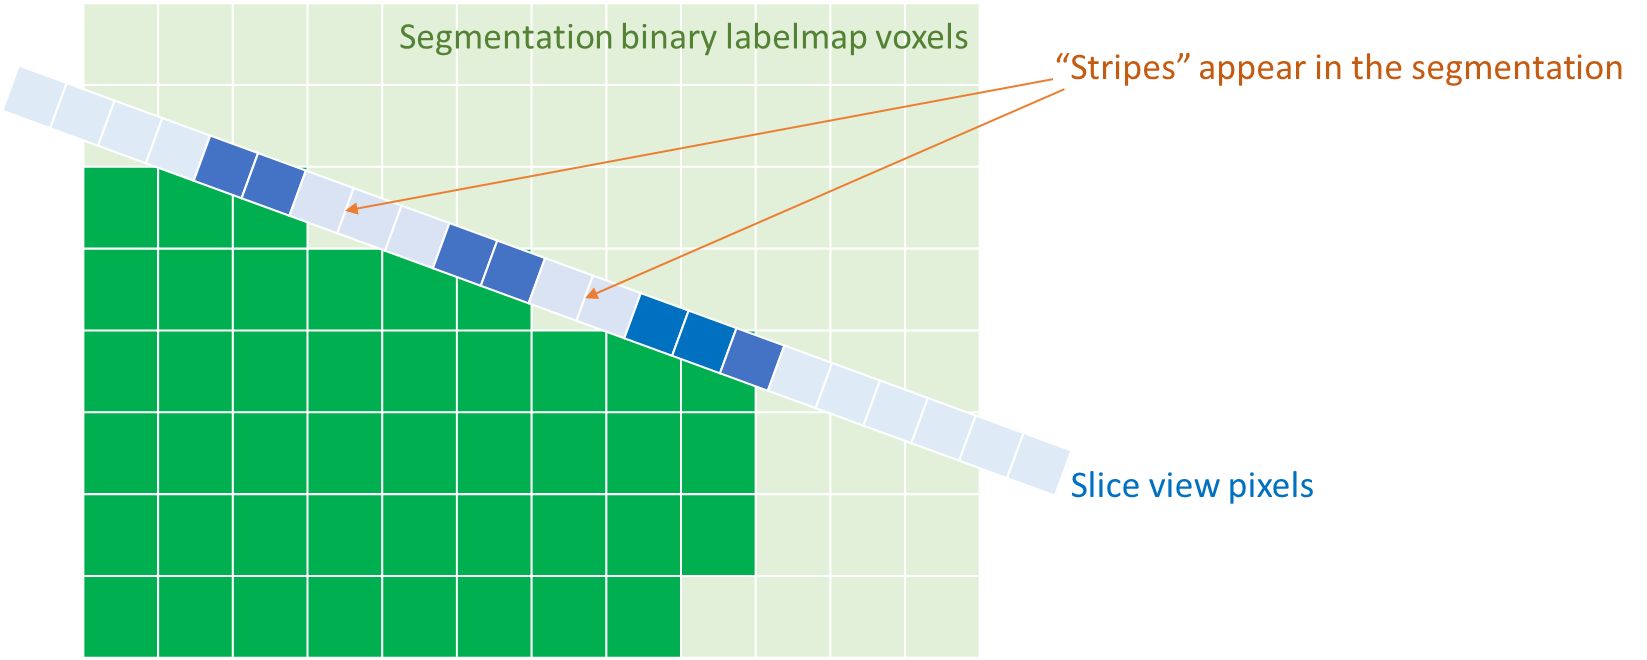 Slice view axes aligned with segmentation axes